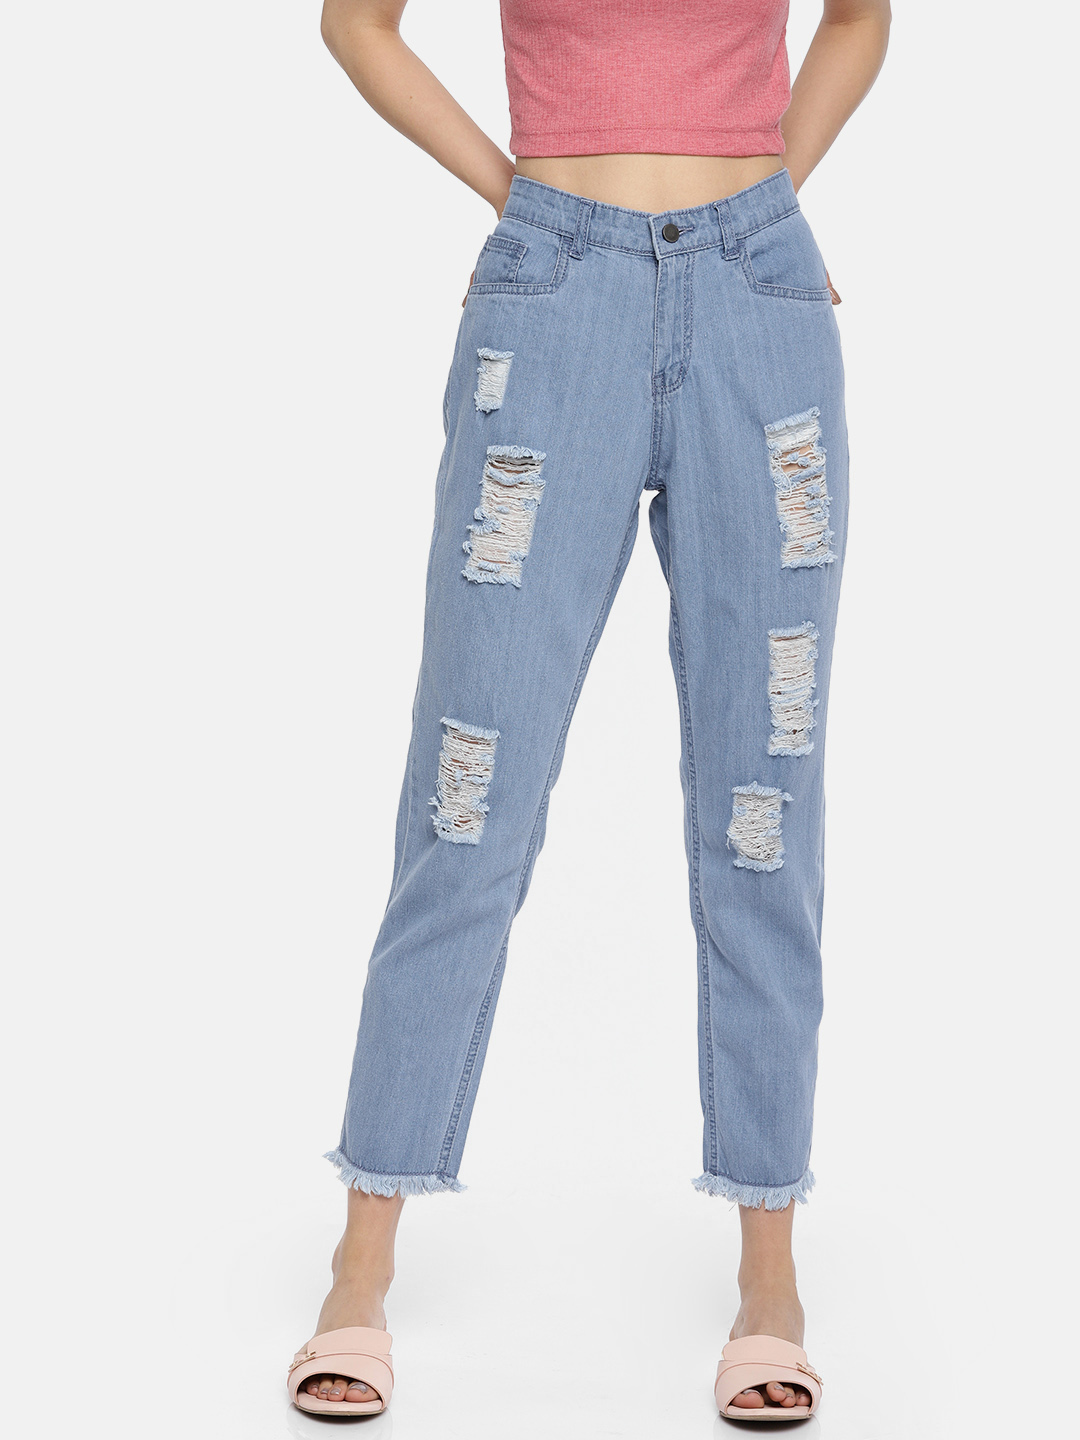 highly distressed jeans